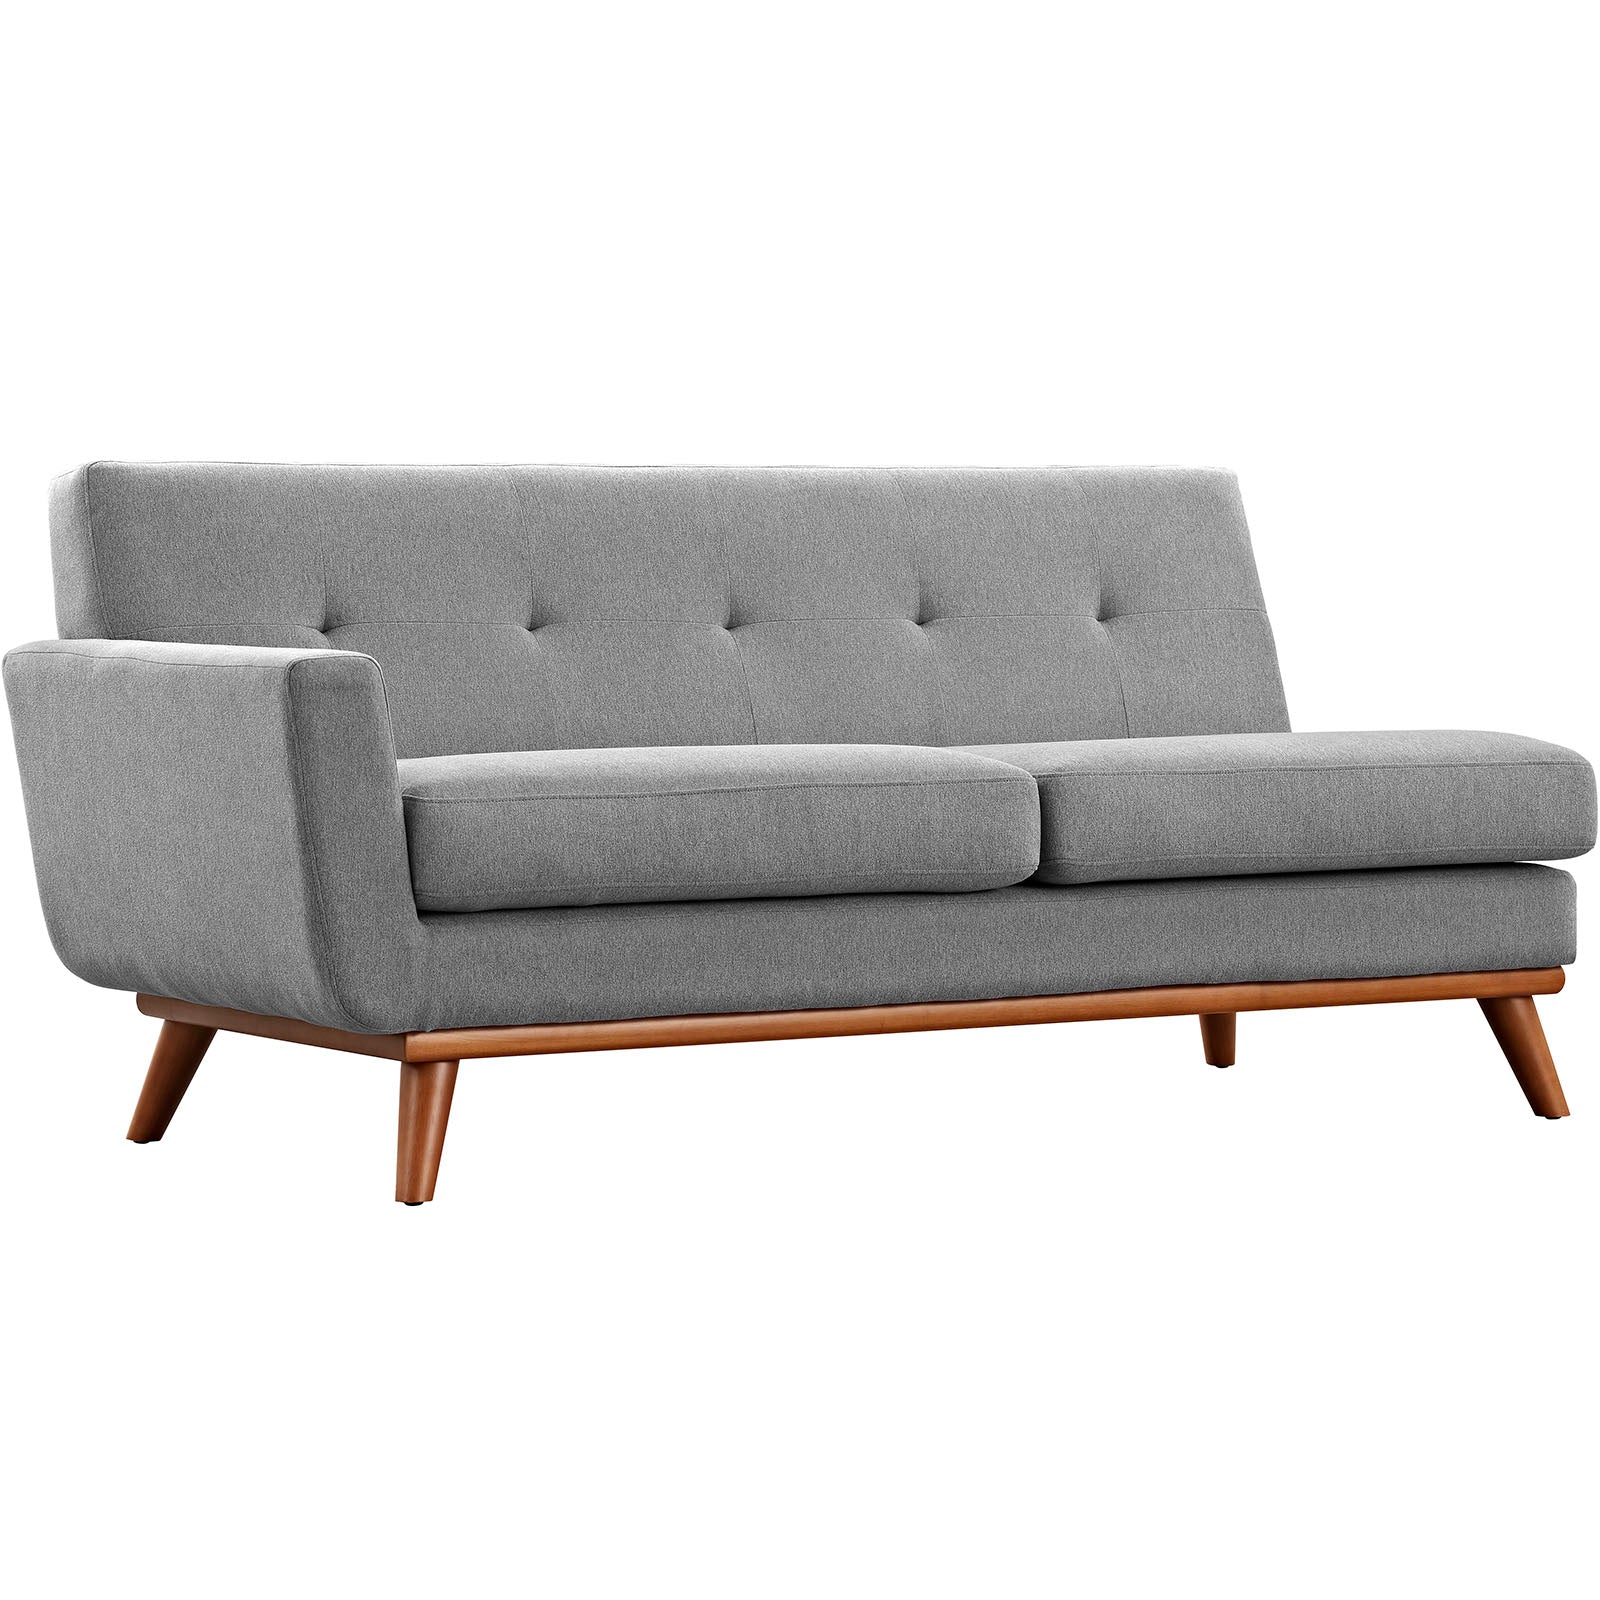 Modway Sectional Sofas - Engage Right-Facing Sectional Sofa Gray